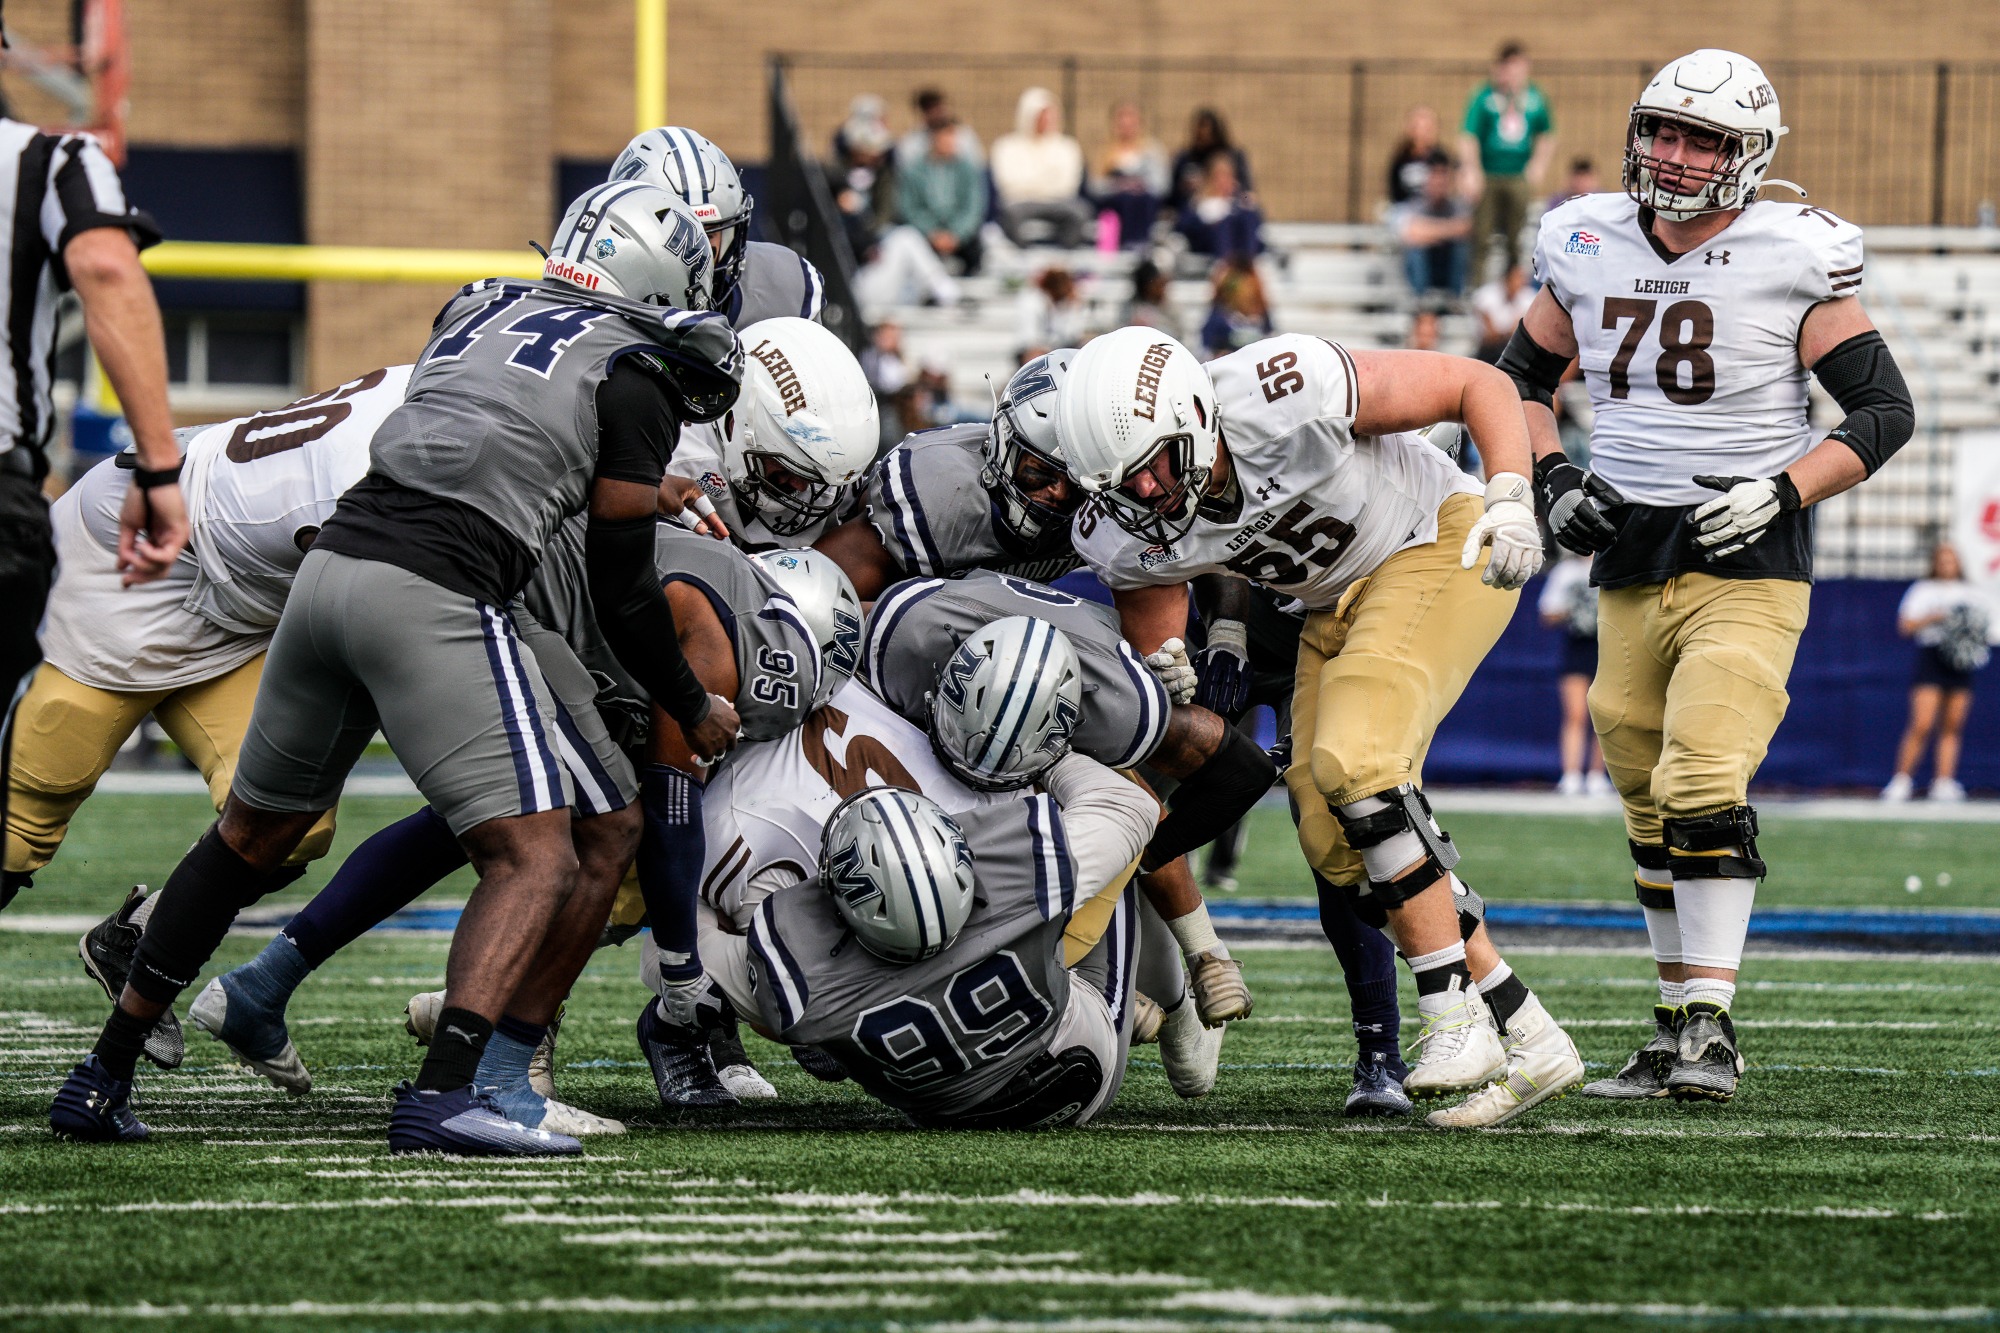 Monmouth Rights The Ship With a Comprehensive 49-7 win over Lehigh